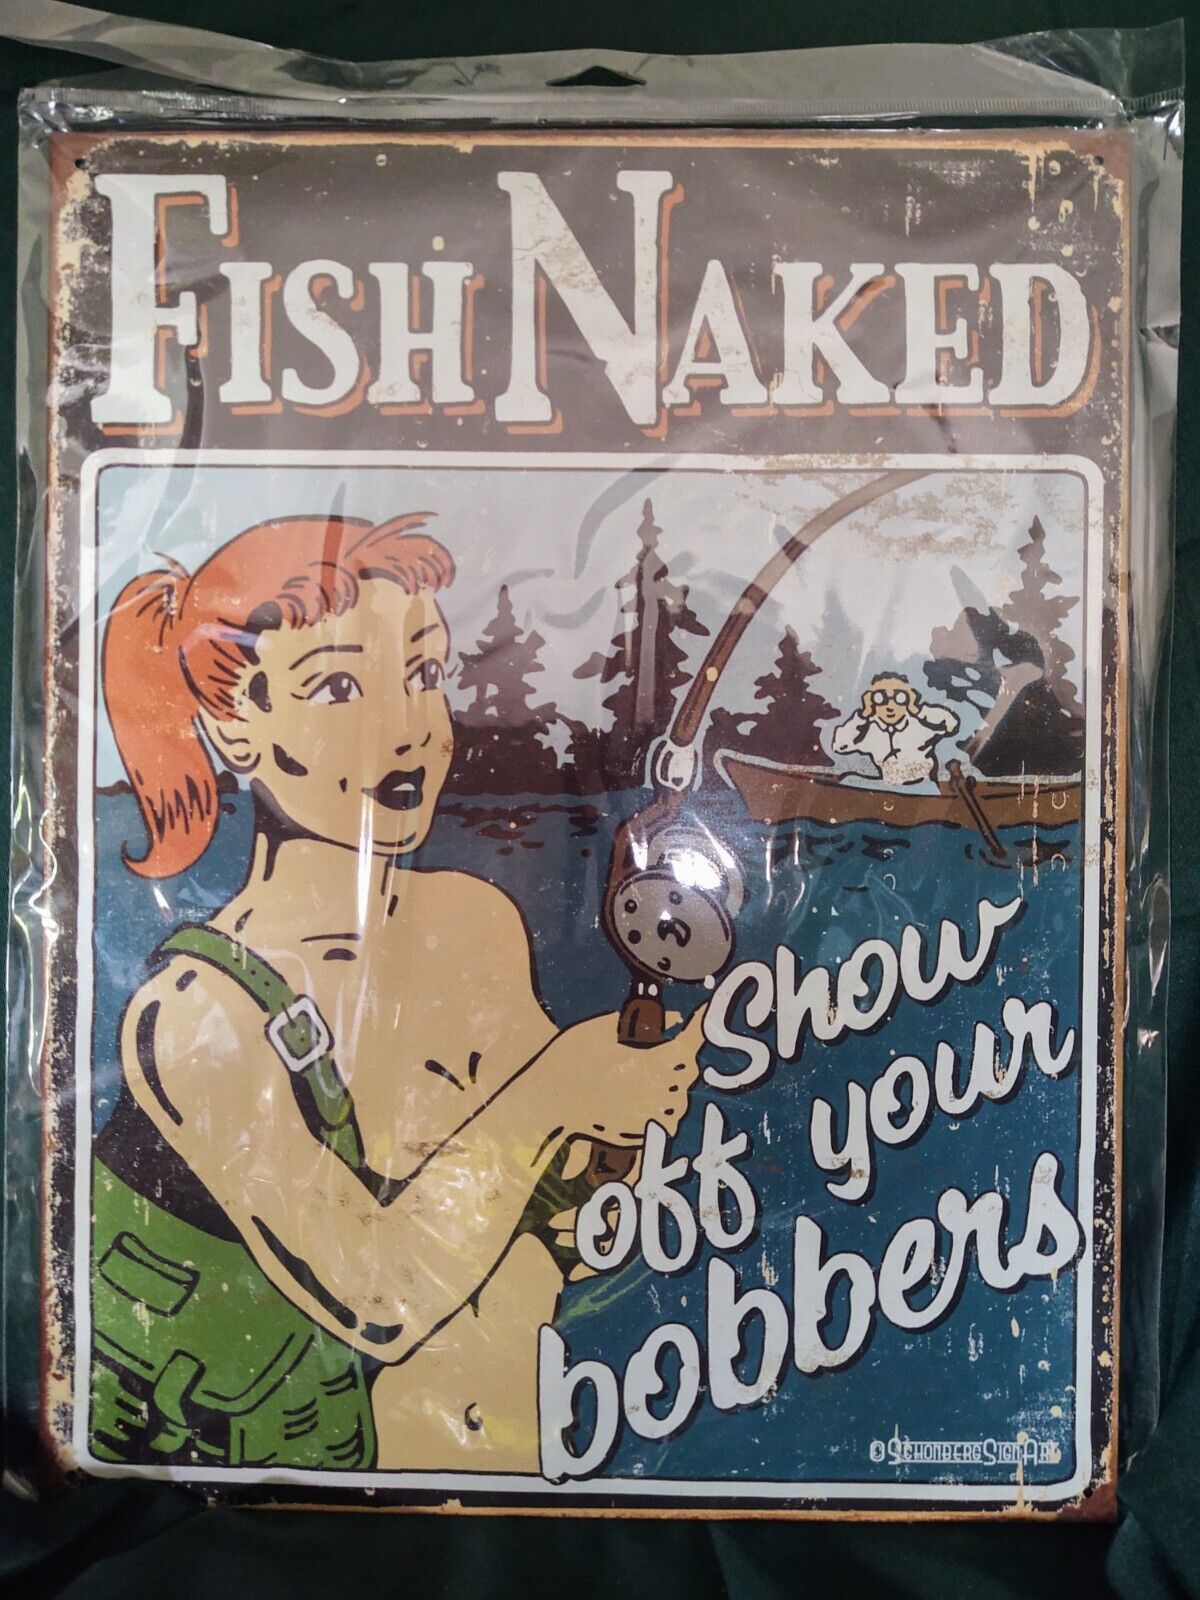 Fish Naked“Schoenberg-Bobbers” Funny, Man Cave, Mom Cave, Wall Art 16”H x 12.5”W